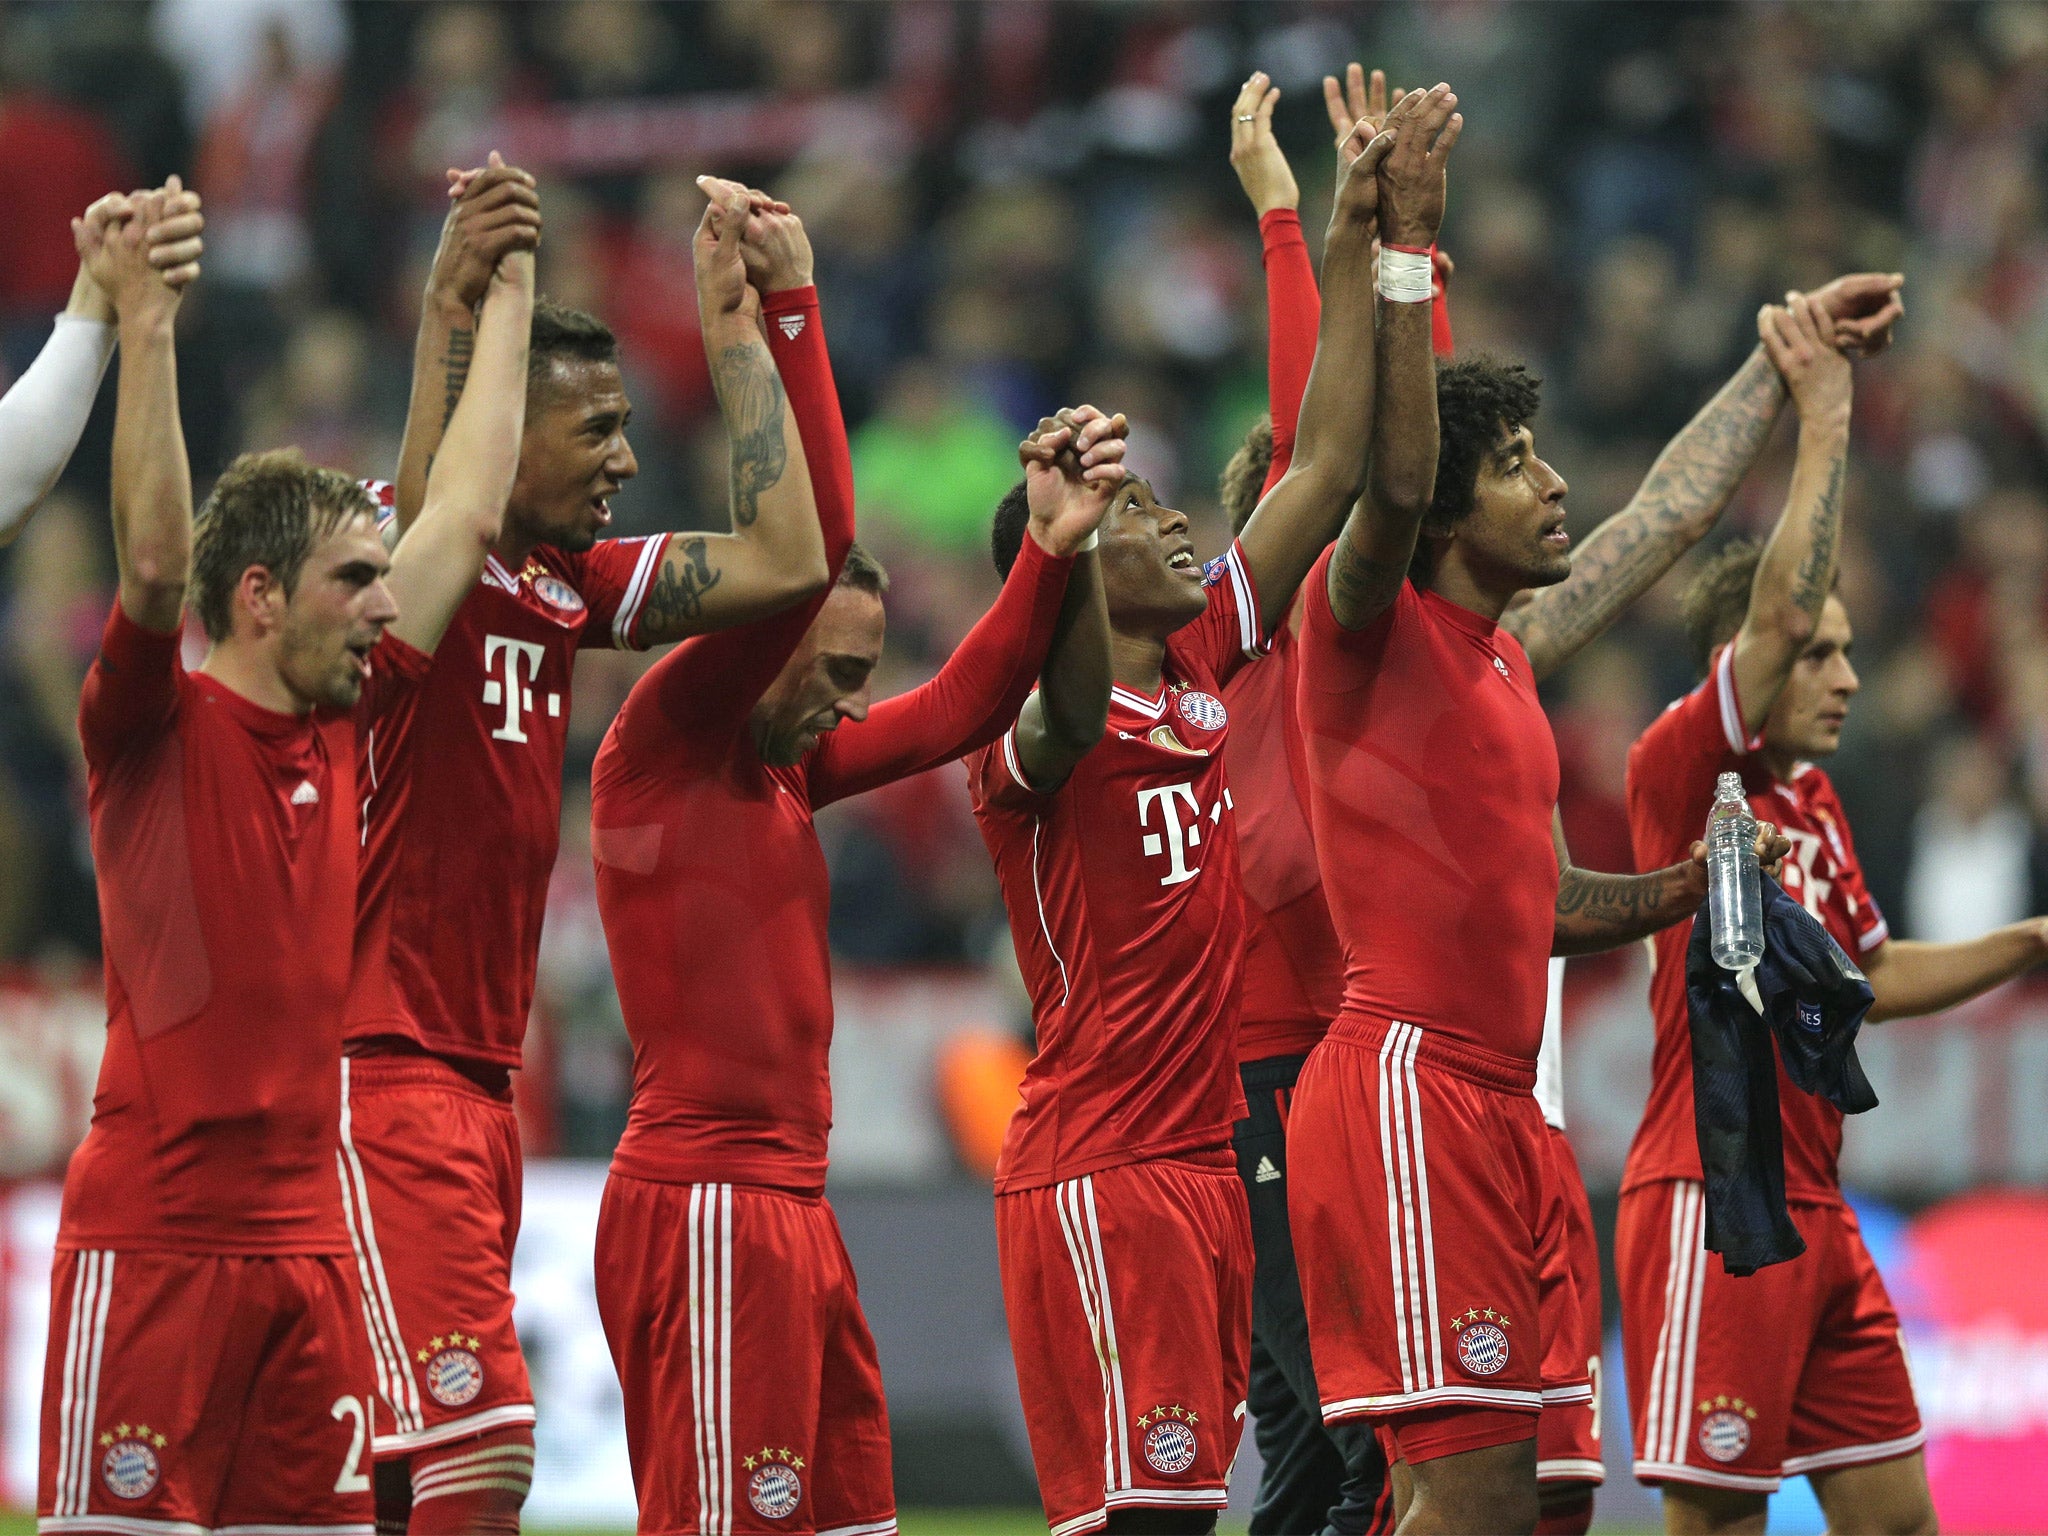 The Bayern players salute their fans after reaching yet another Champions League semi-final